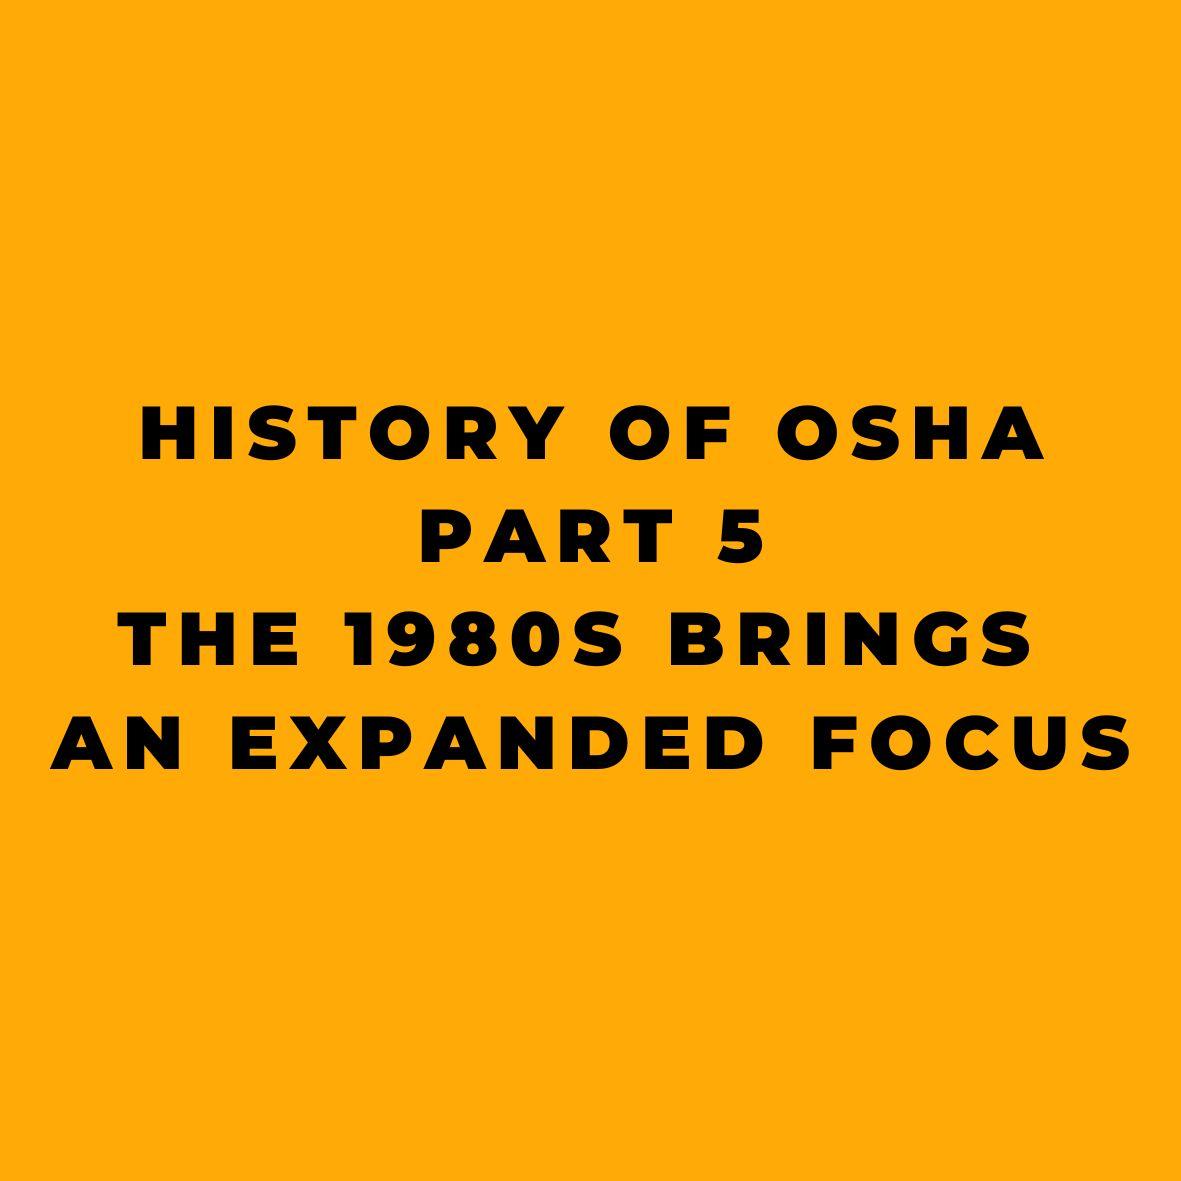 History of OSHA - Part 5 - The 1980s Brings an Expanded Focus